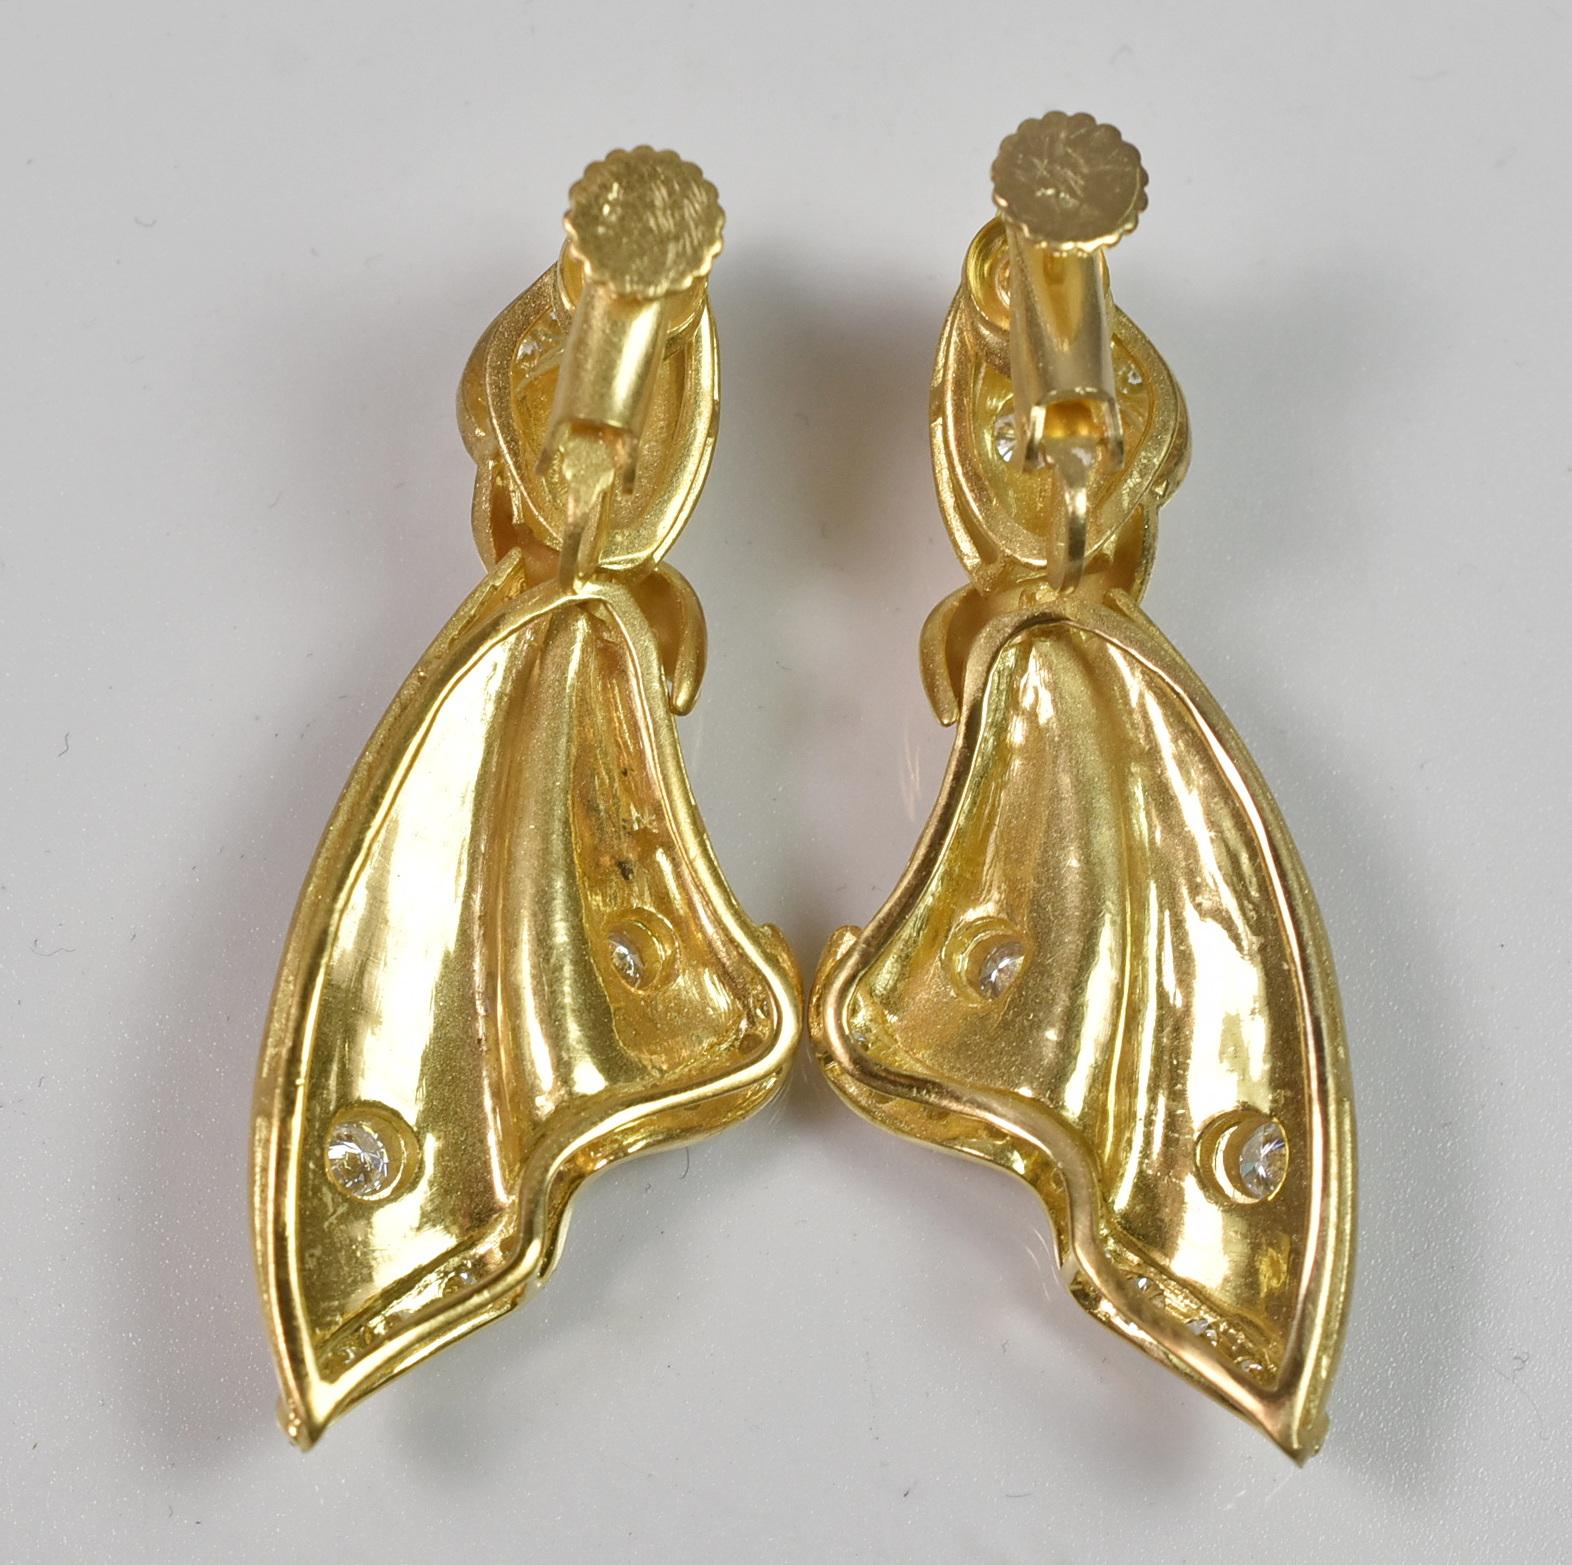 American, 2nd half-20th century. Each earring custom designed as a diamond set gold furled ribbon drop, hinged at top with screw back clips. Forty round diamonds, estimated total weight 1.60cts, clarity VS, color F/G. Very good condition. Overall